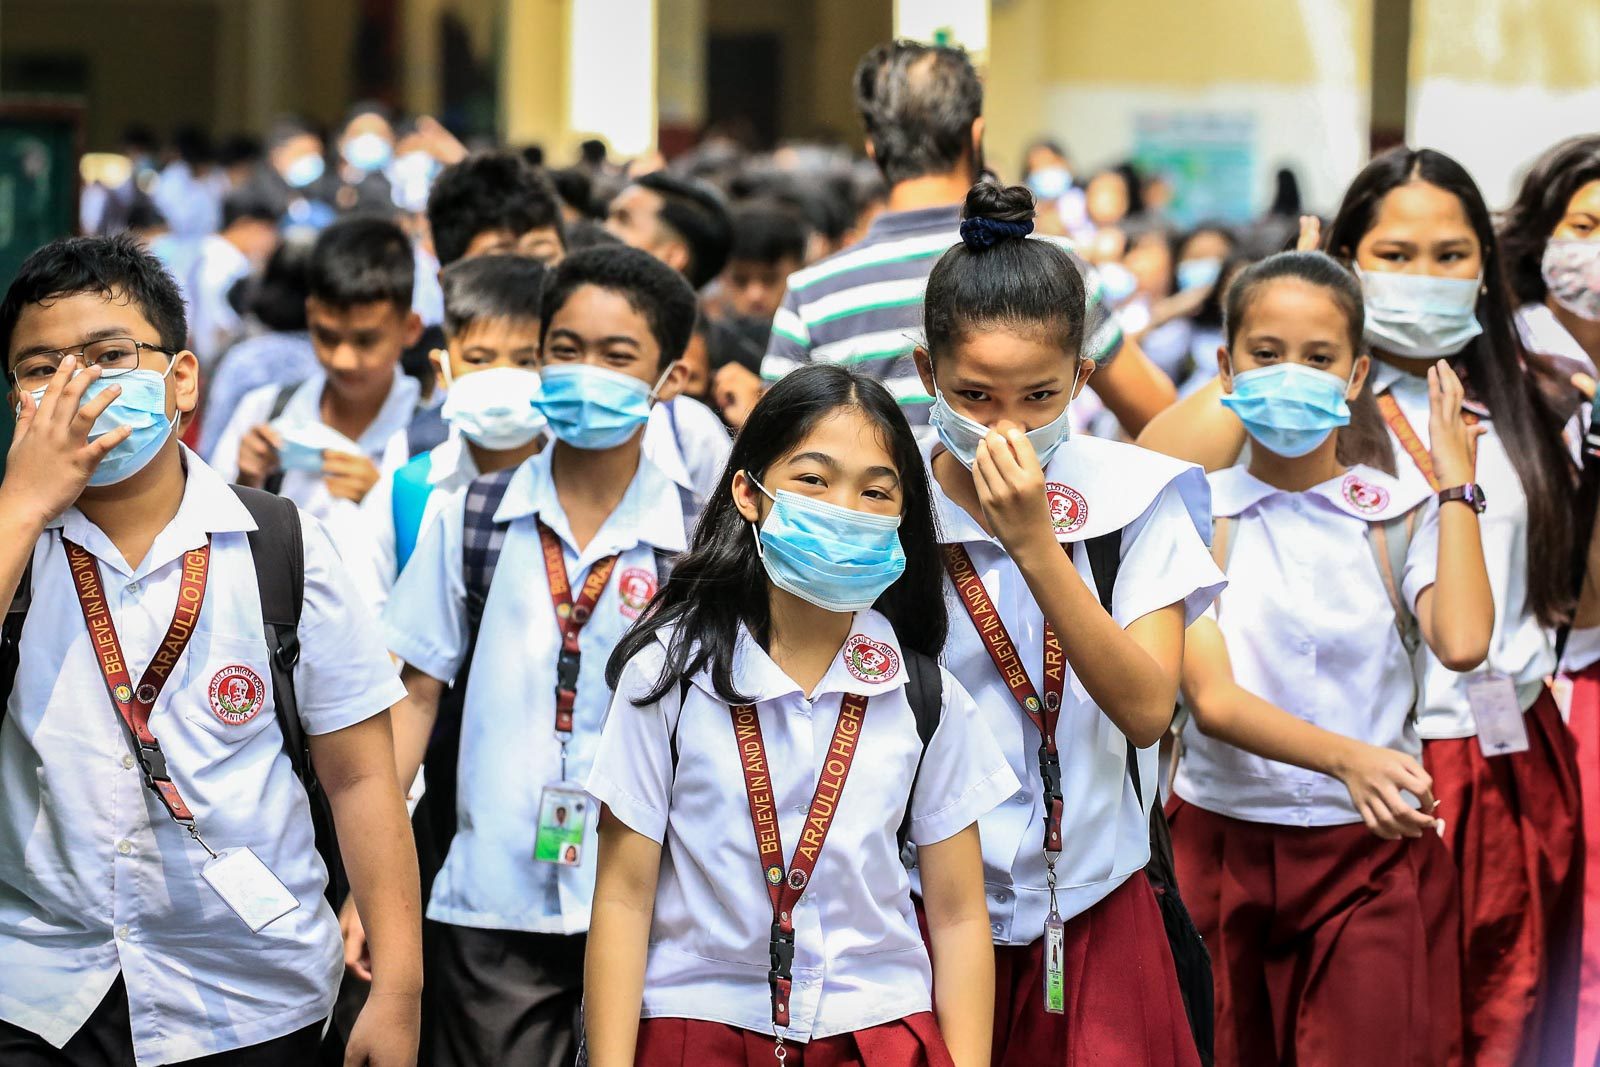 No graduation rites in the country during coronavirus pandemic – Briones